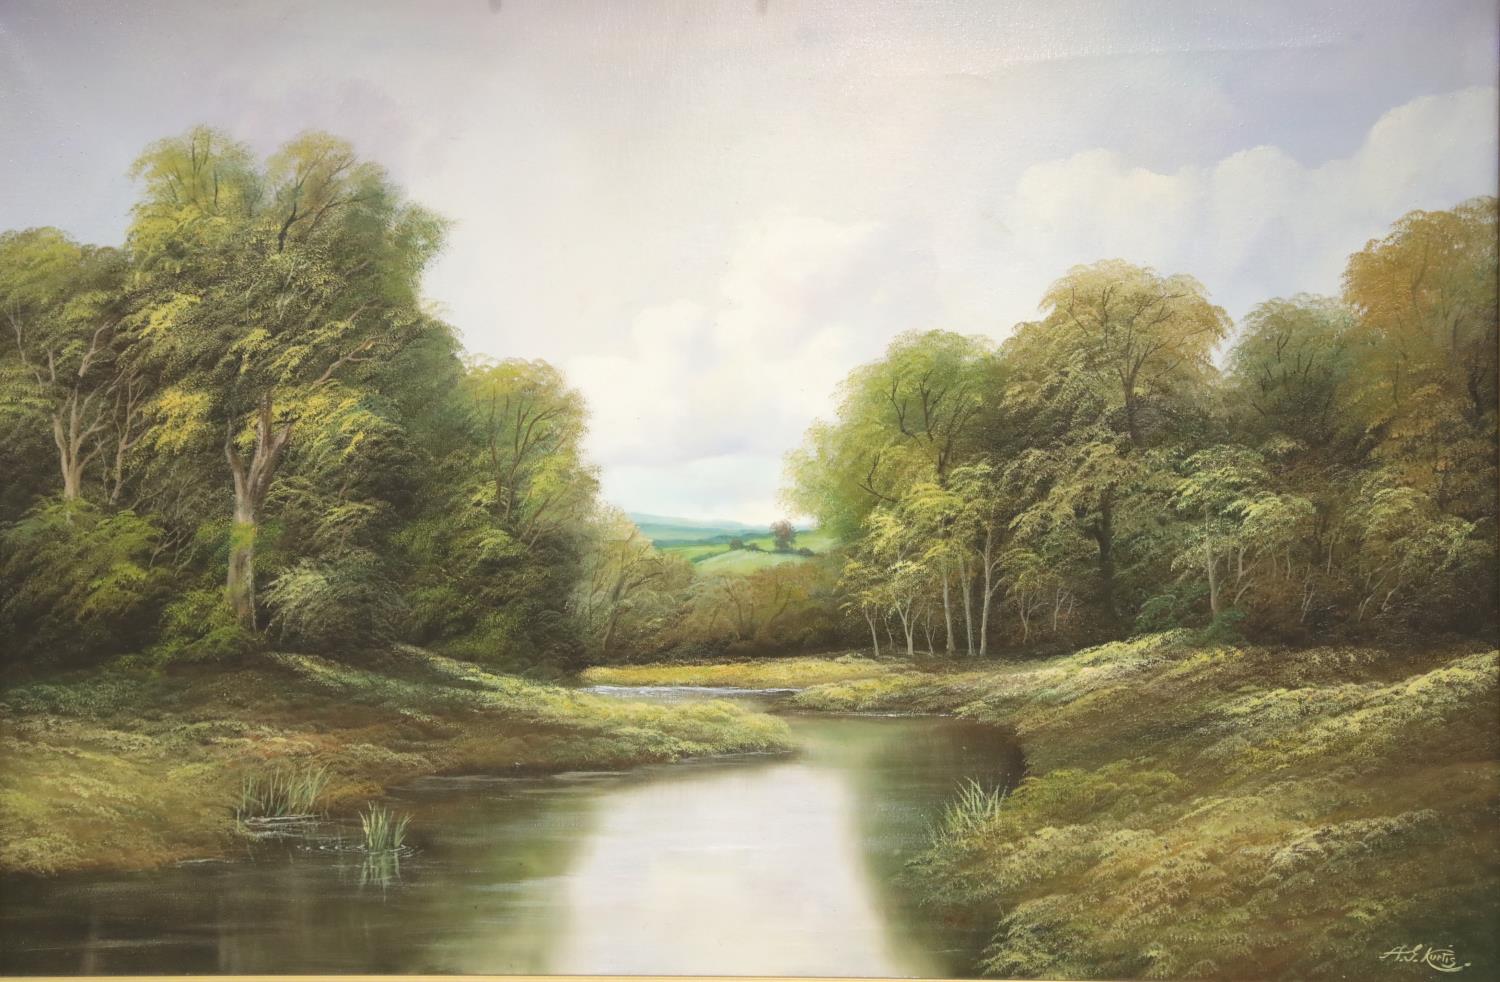 ANDREW GRANT KURTIS landscape oil on canvas 90 x 58 cm. P&P Group 3, (£25+VAT for the first lot